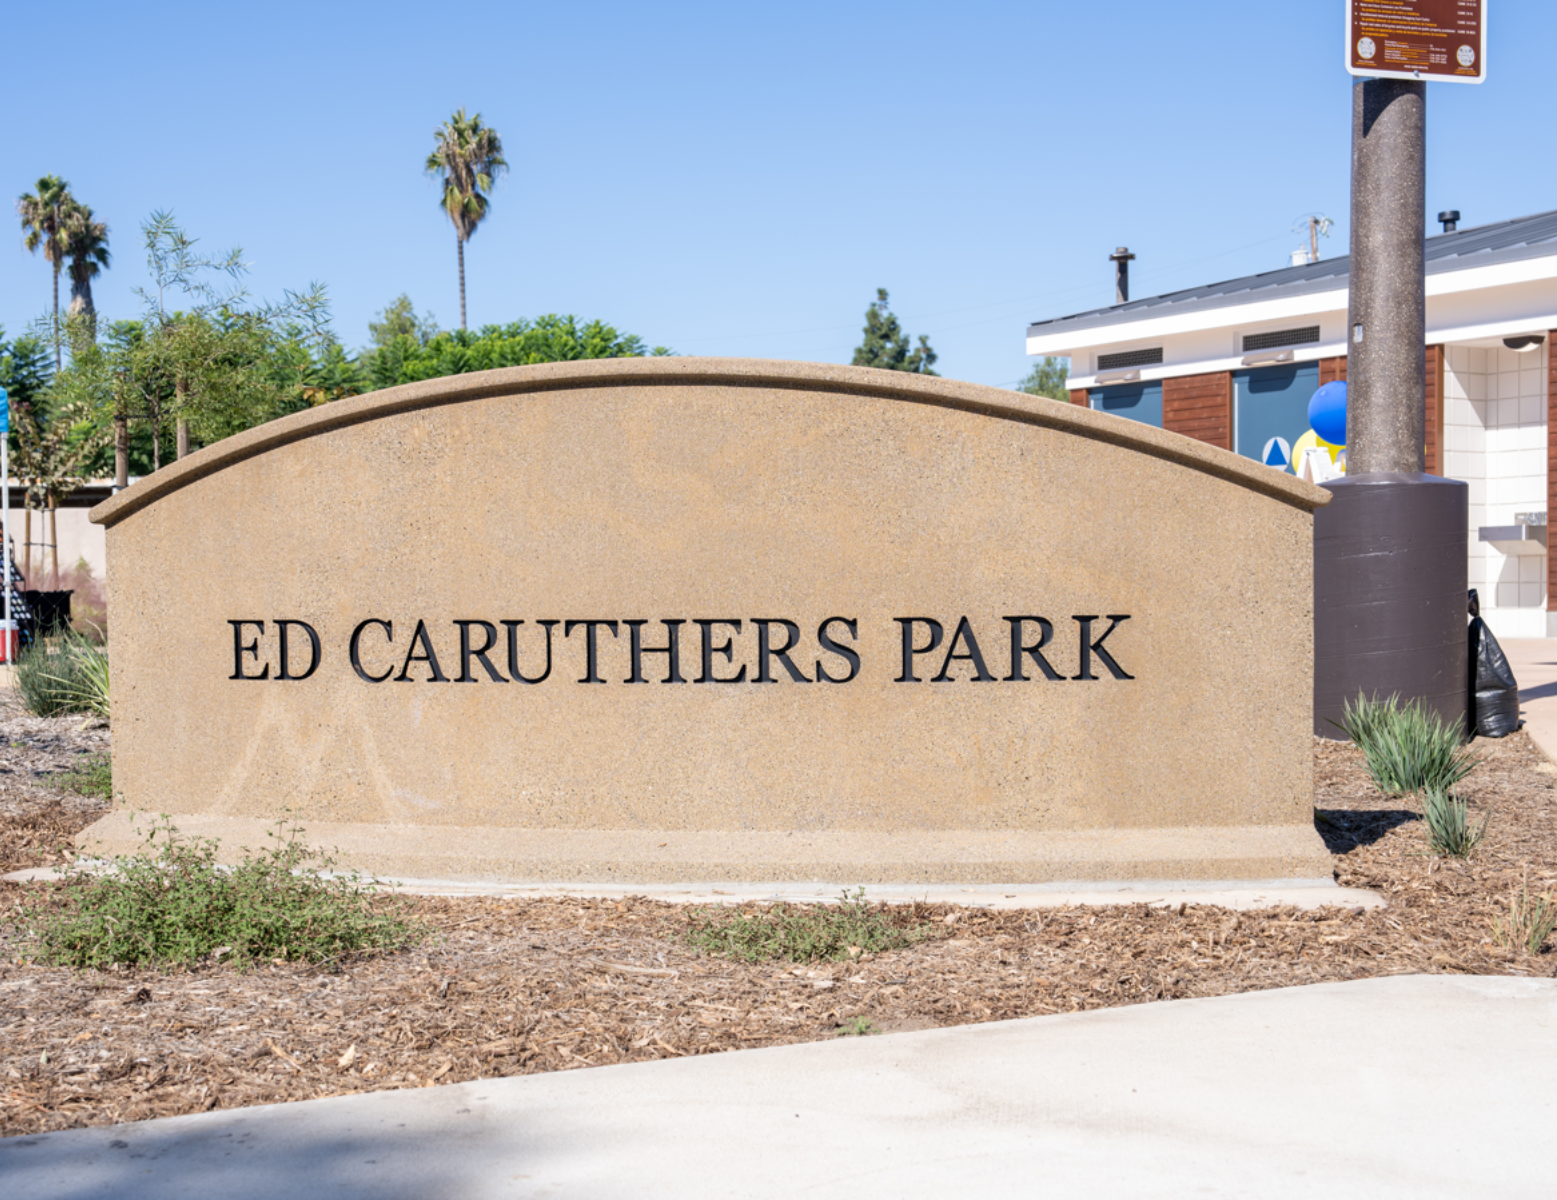 Ed Caruthers park sign